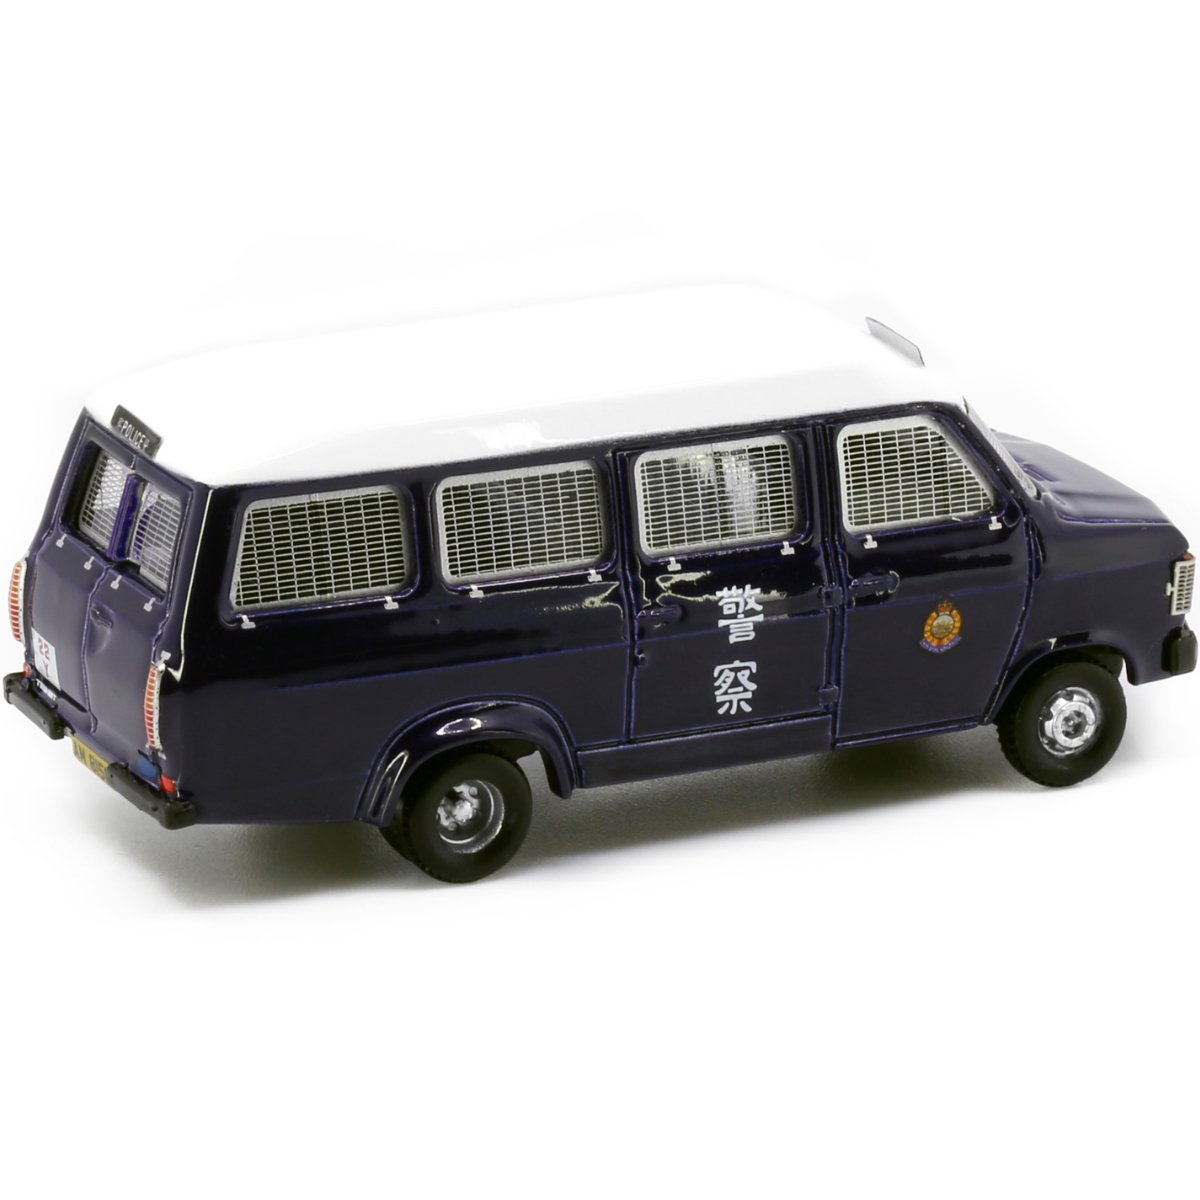 Tiny Models 1980's Police Van - Without Beacon (1:76 Scale) - Phillips Hobbies